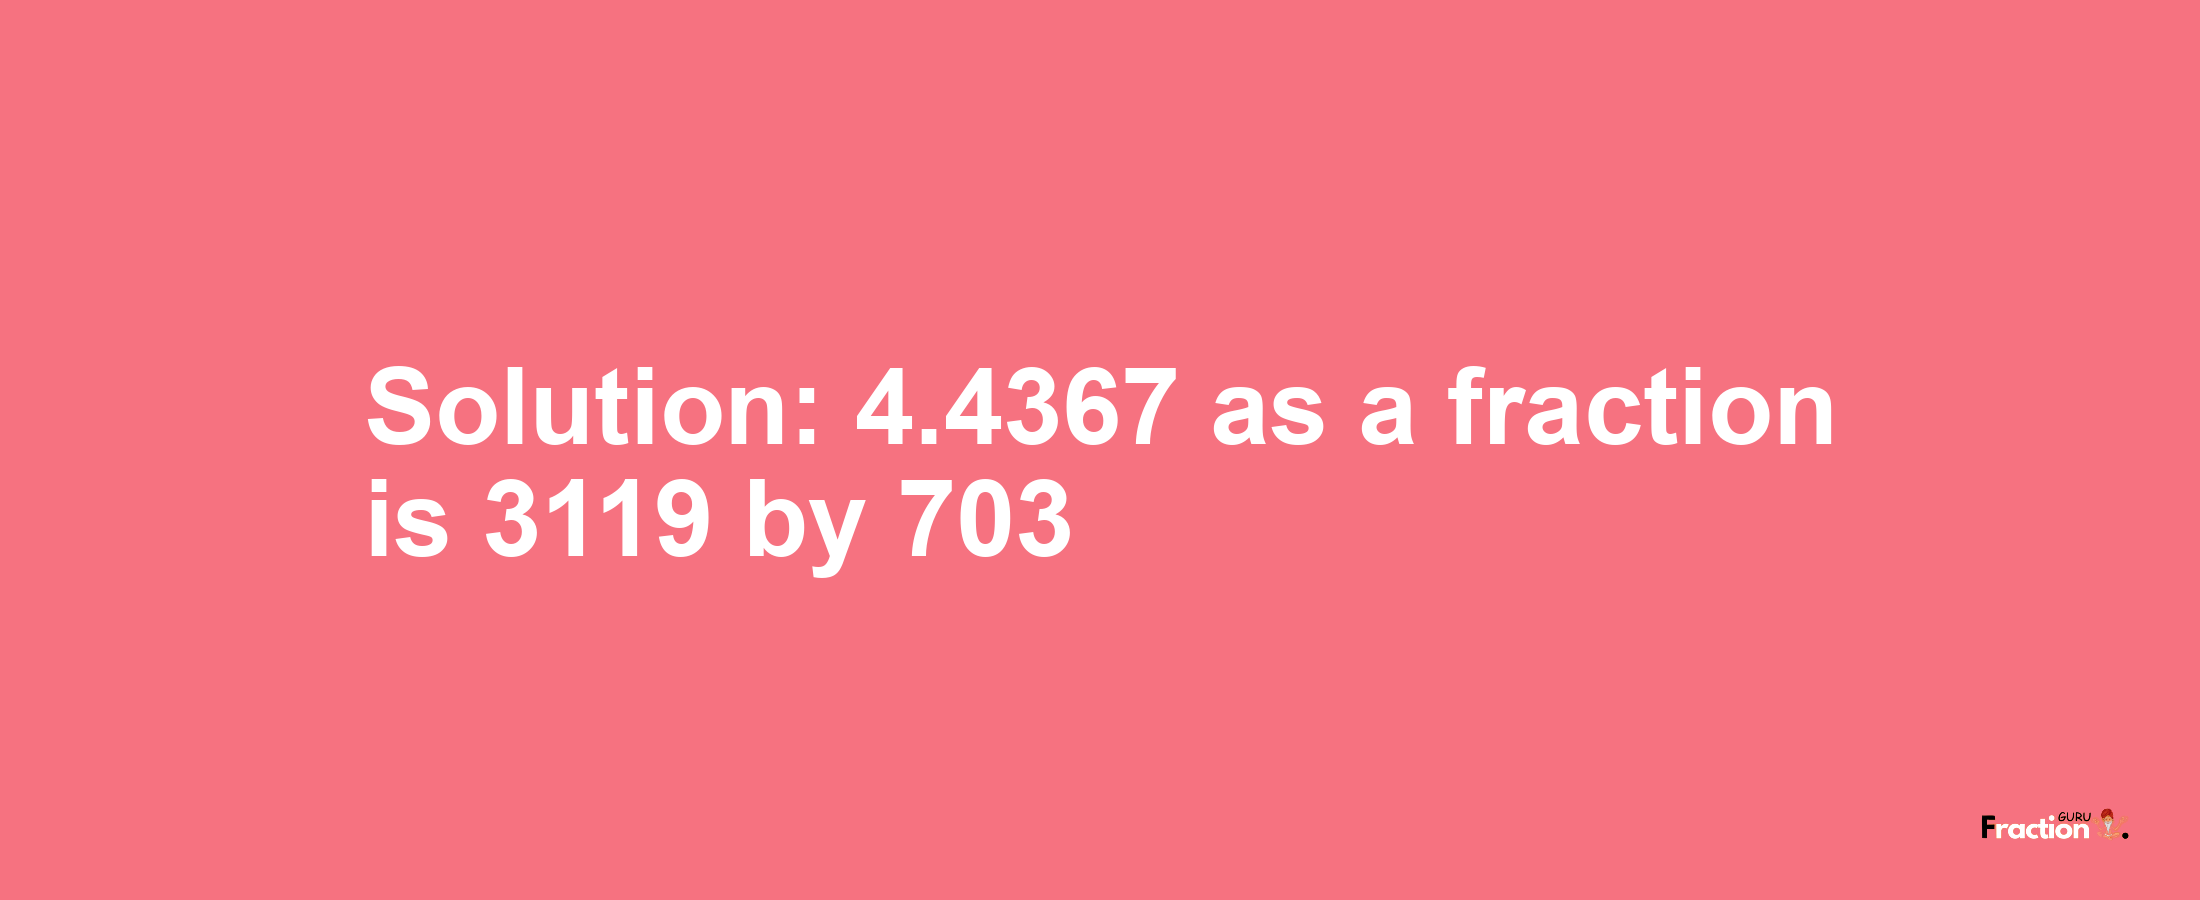 Solution:4.4367 as a fraction is 3119/703